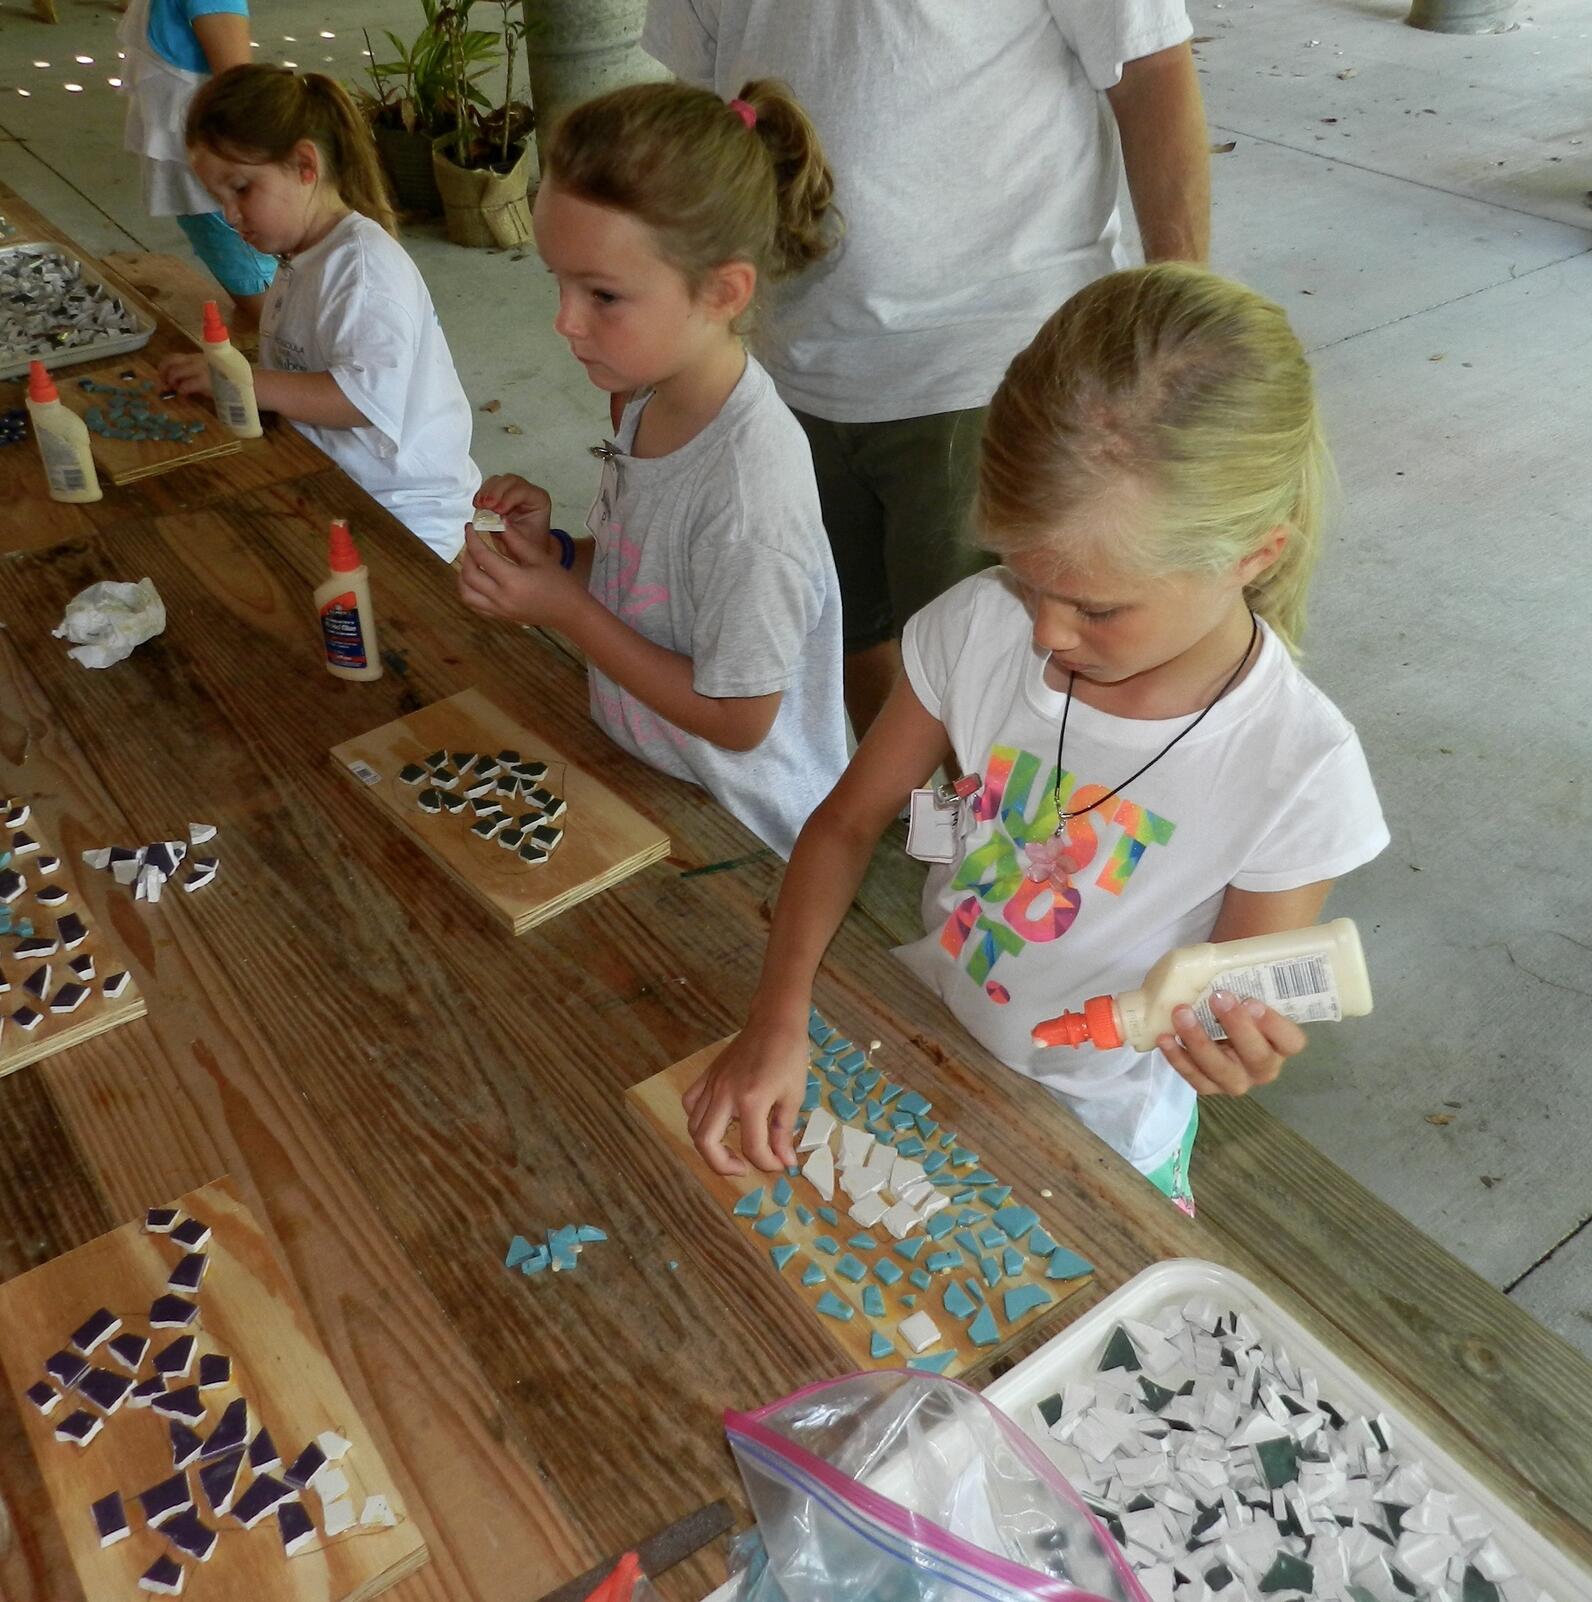 Three young girls use liquid glue and broken glass to create a mosaic on a slab of wood.